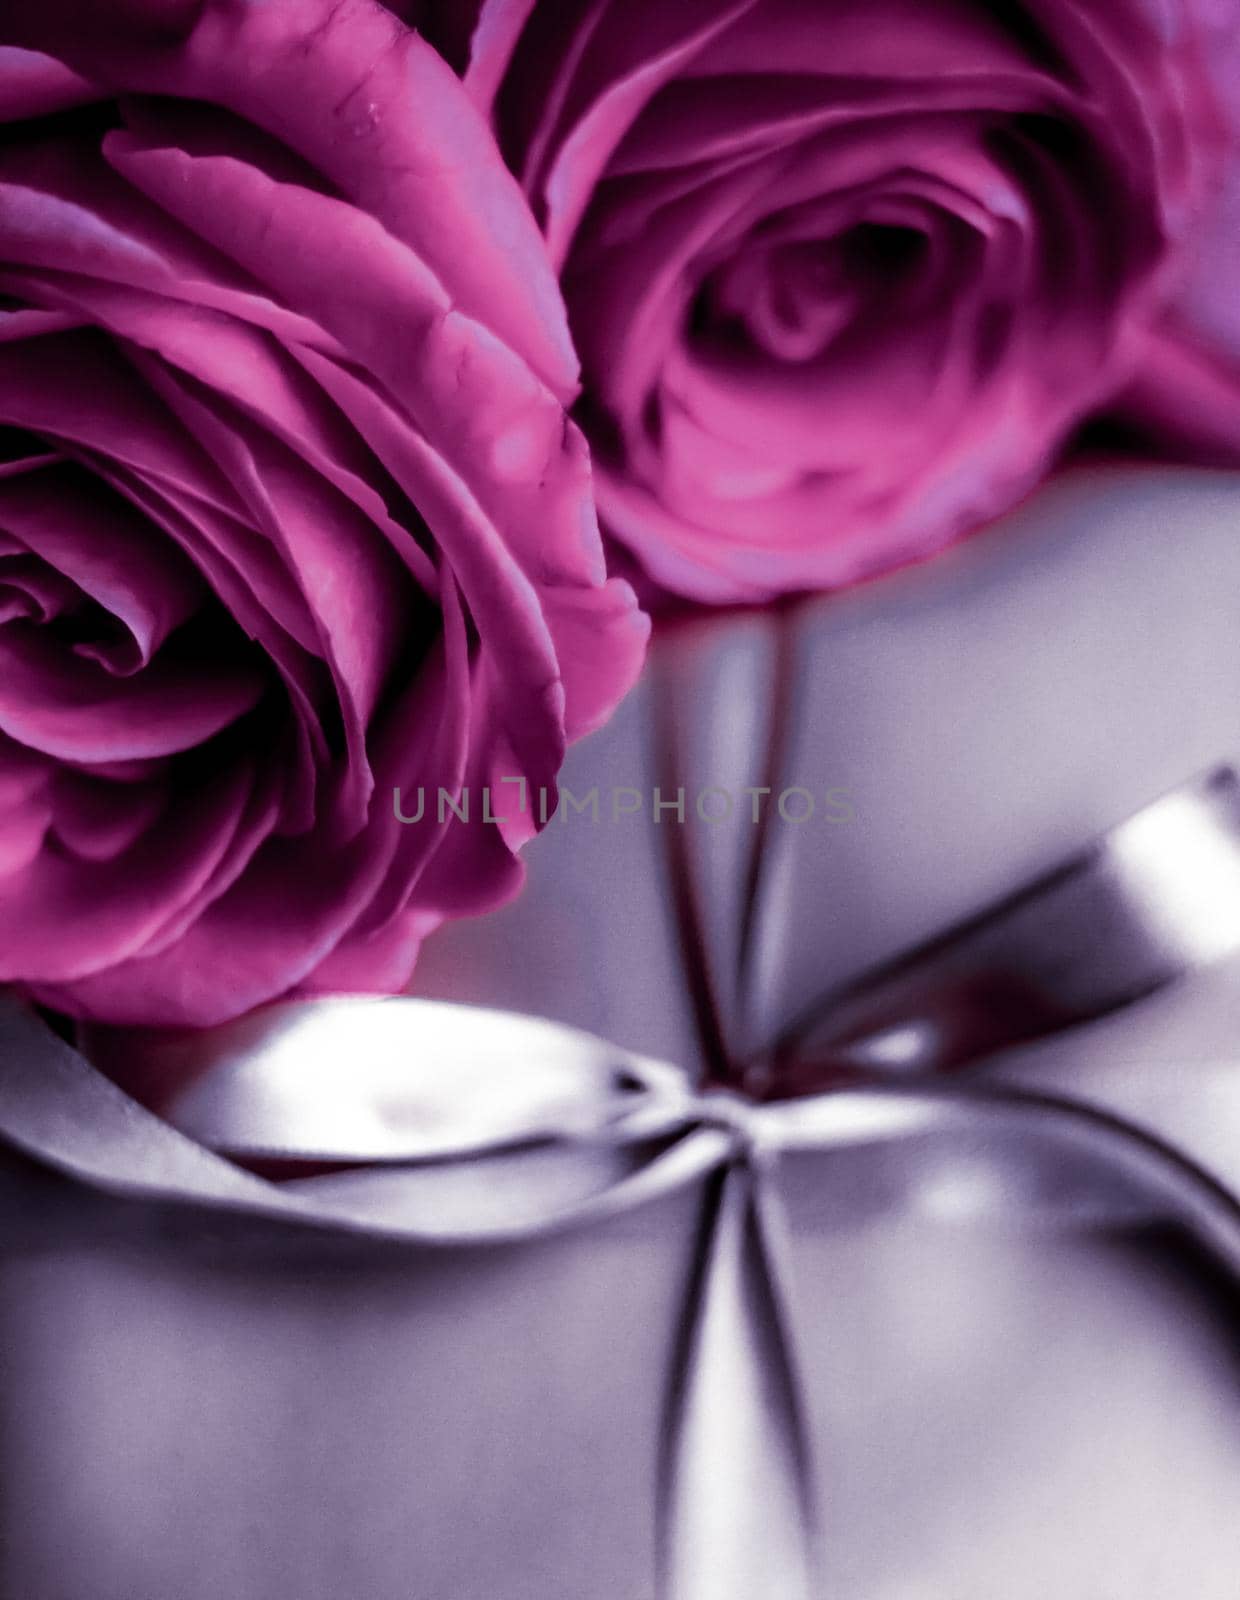 Luxury holiday silver gift box and pink roses as Christmas, Valentines Day or birthday present by Anneleven